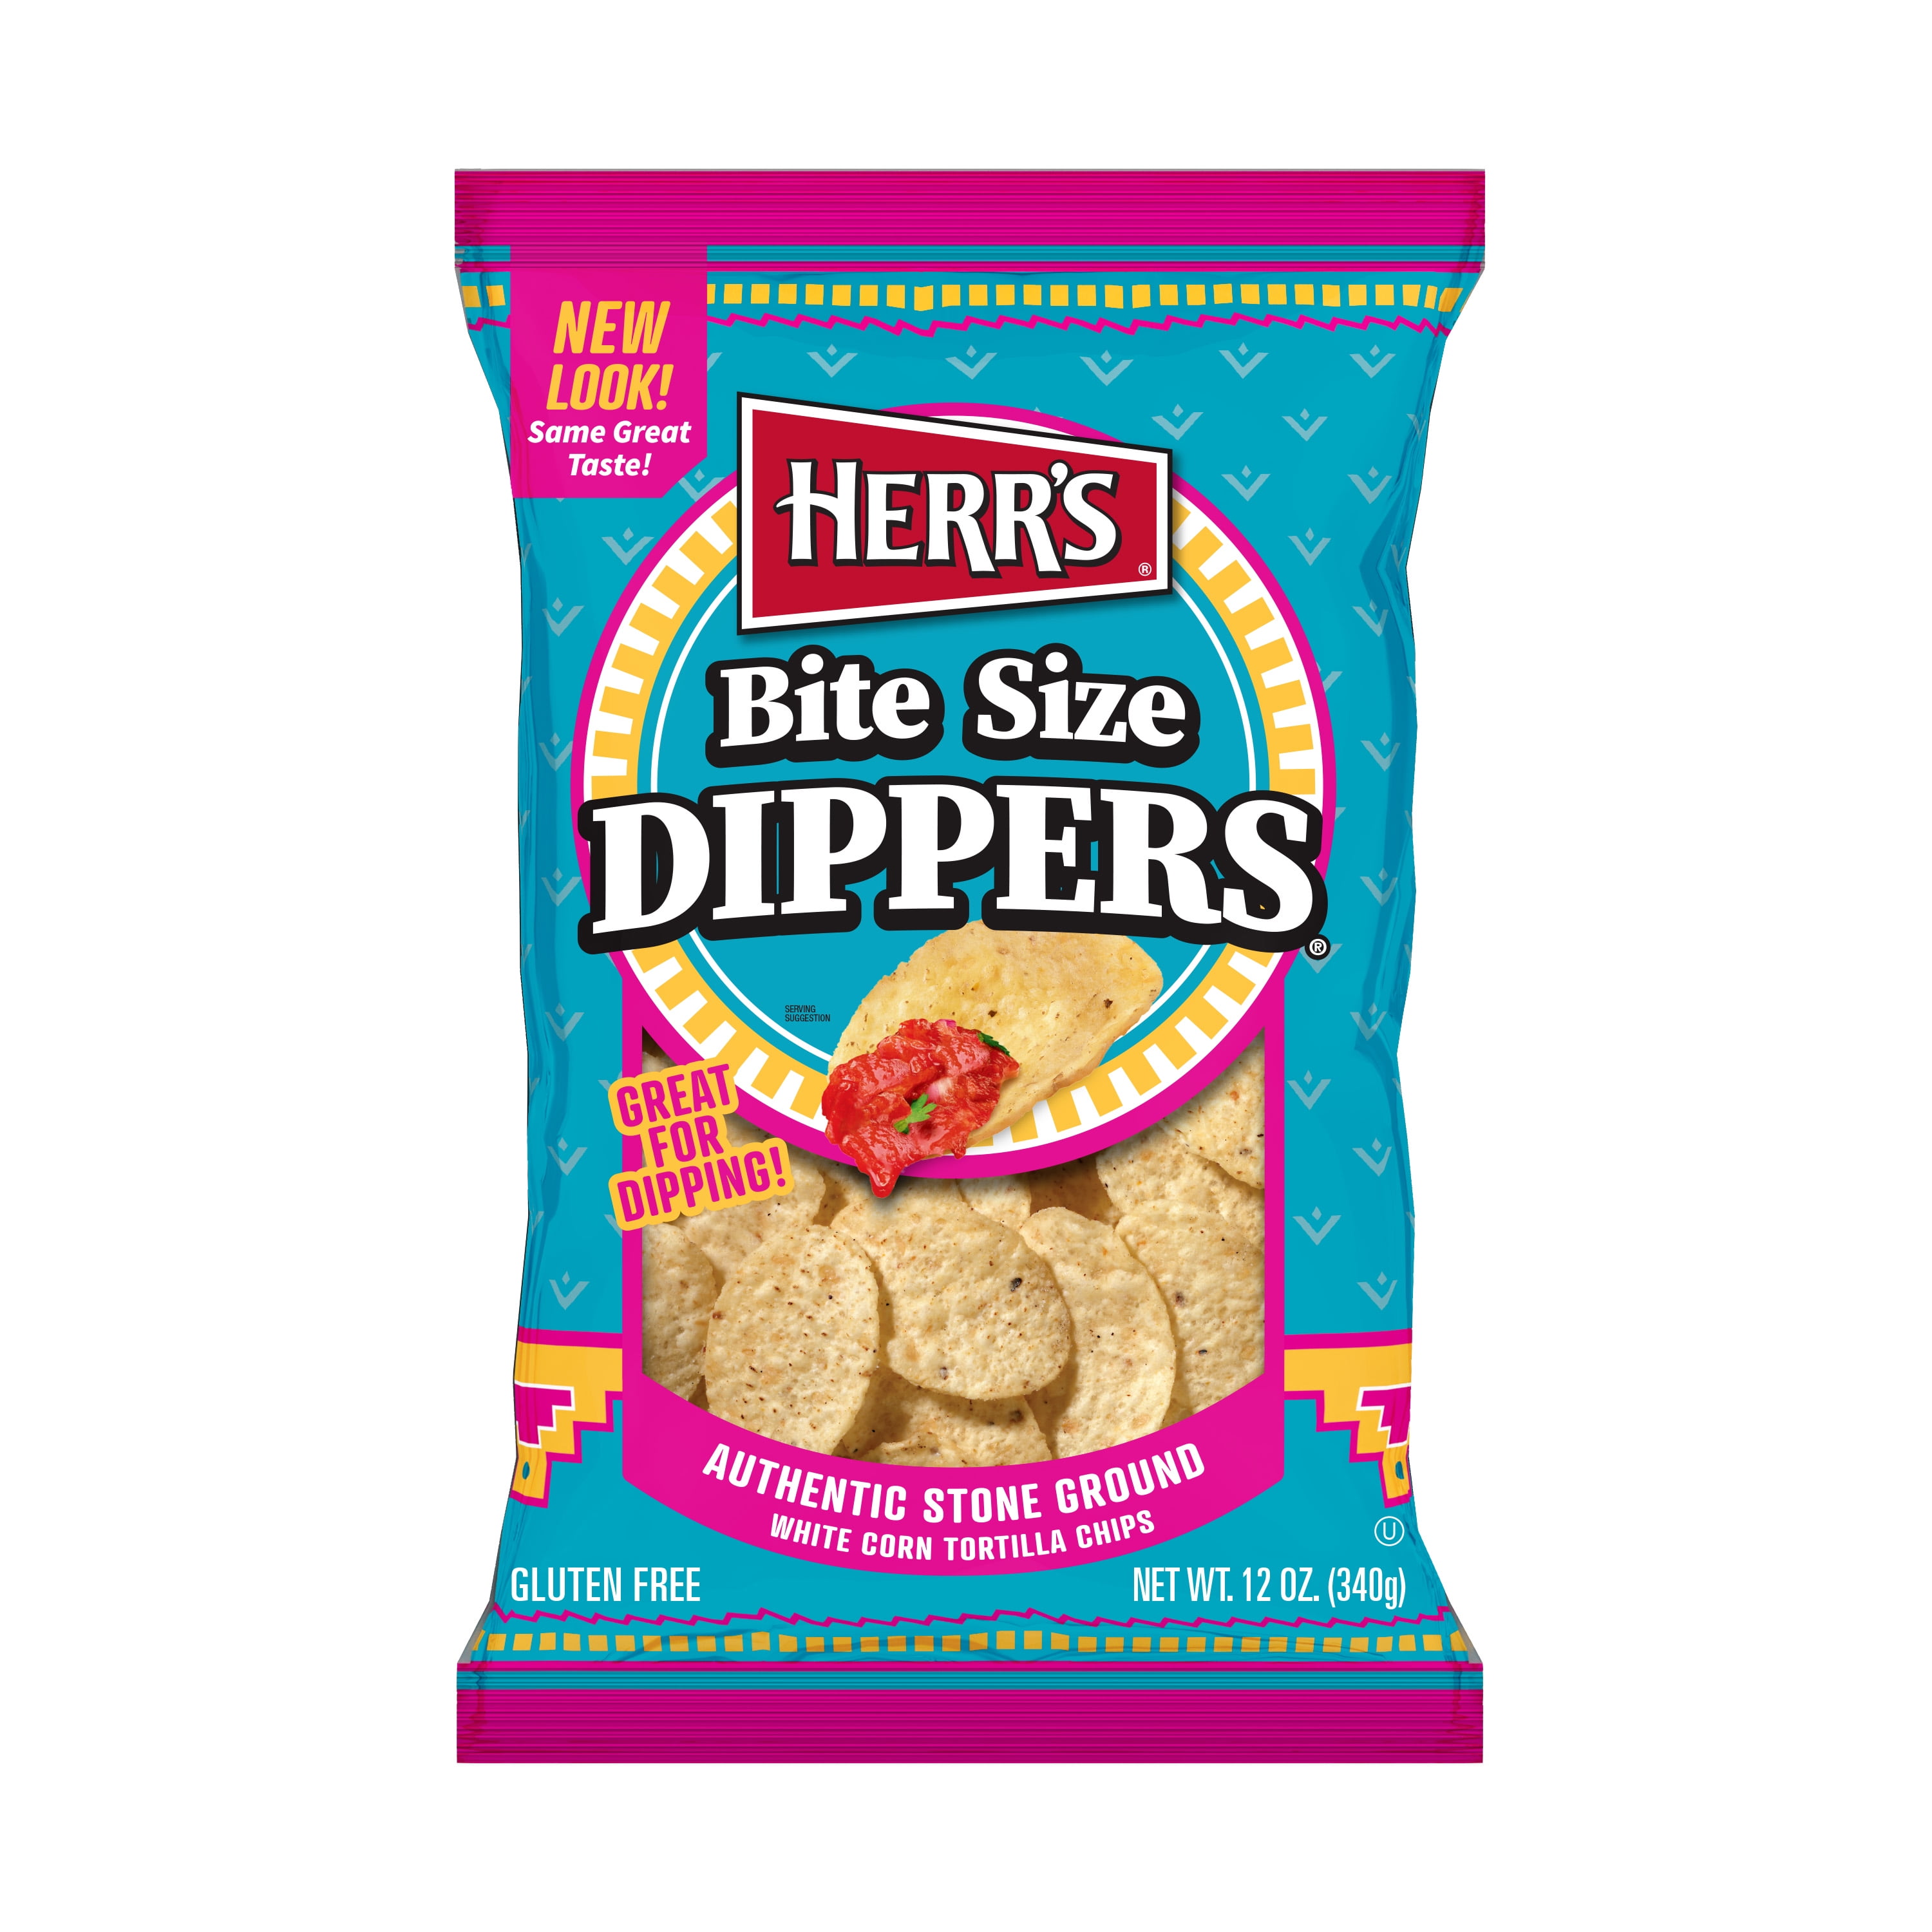 Herr's Bite Size Dippers Tortilla Chips, 12 oz